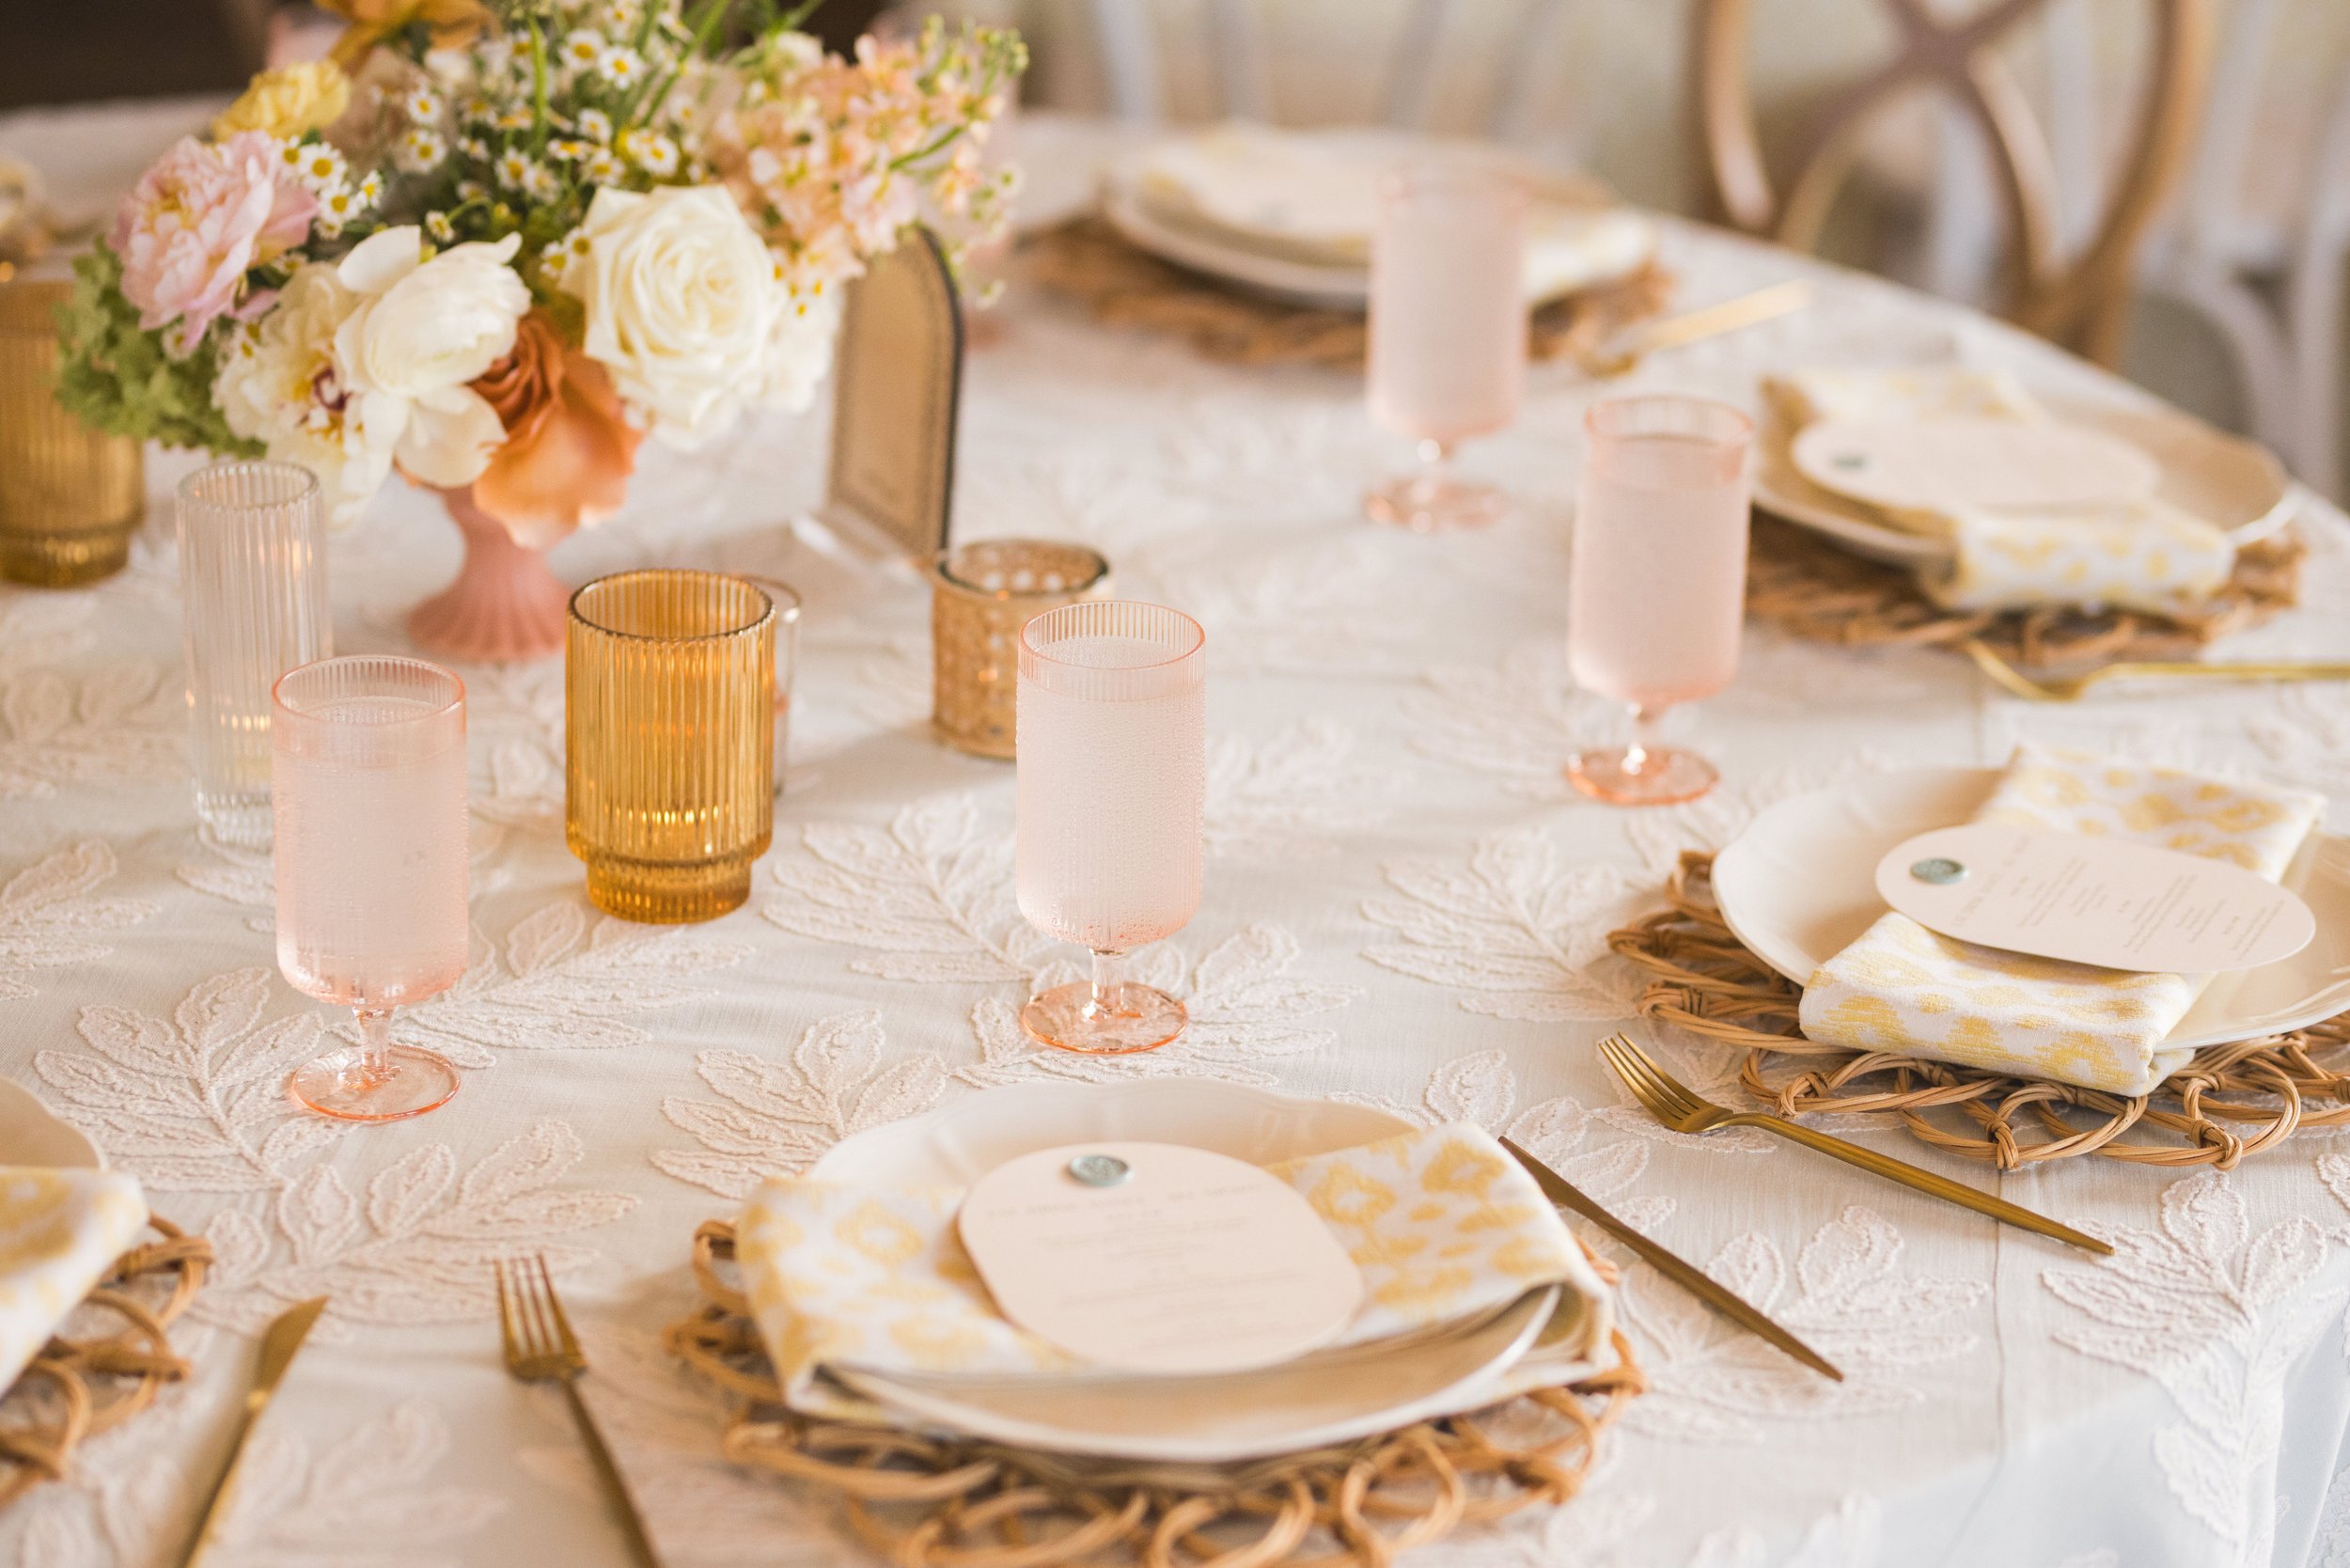  A table setting with pink and gold glass rentals and tableware at event. 